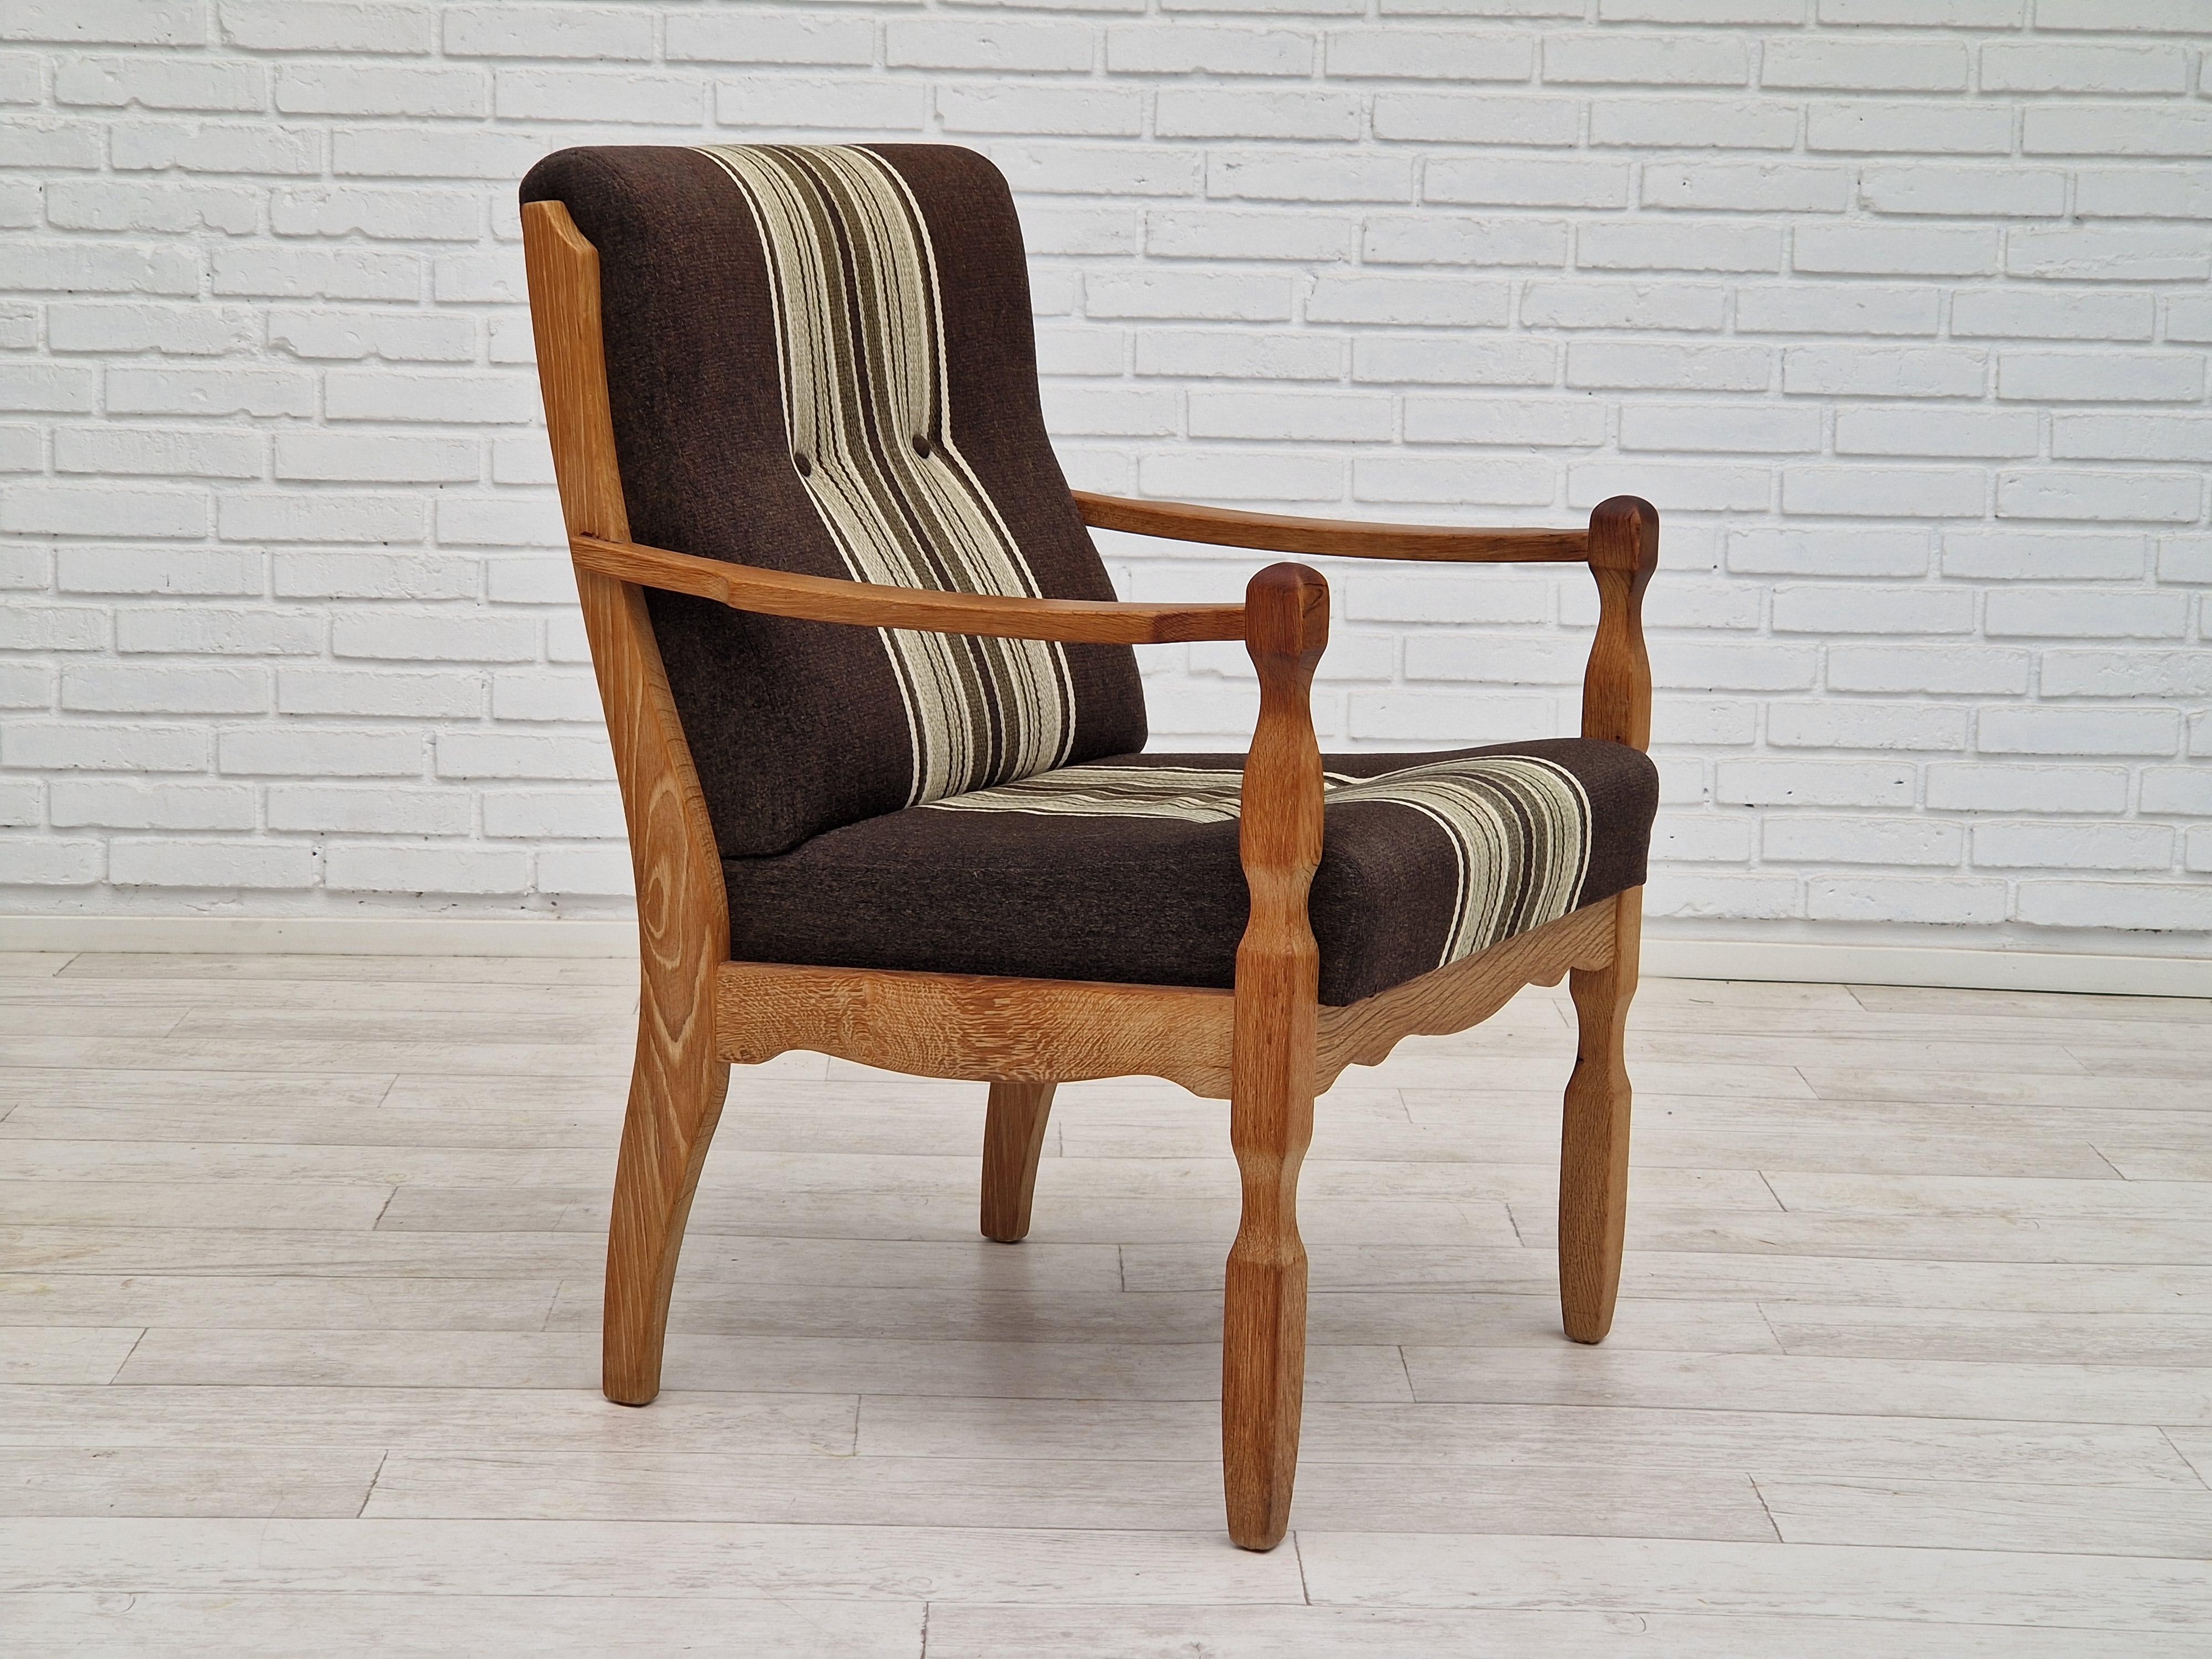 1970s, Danish design. Oak wood armchair in furniture wool. Original very good condition: no smells and no stains.